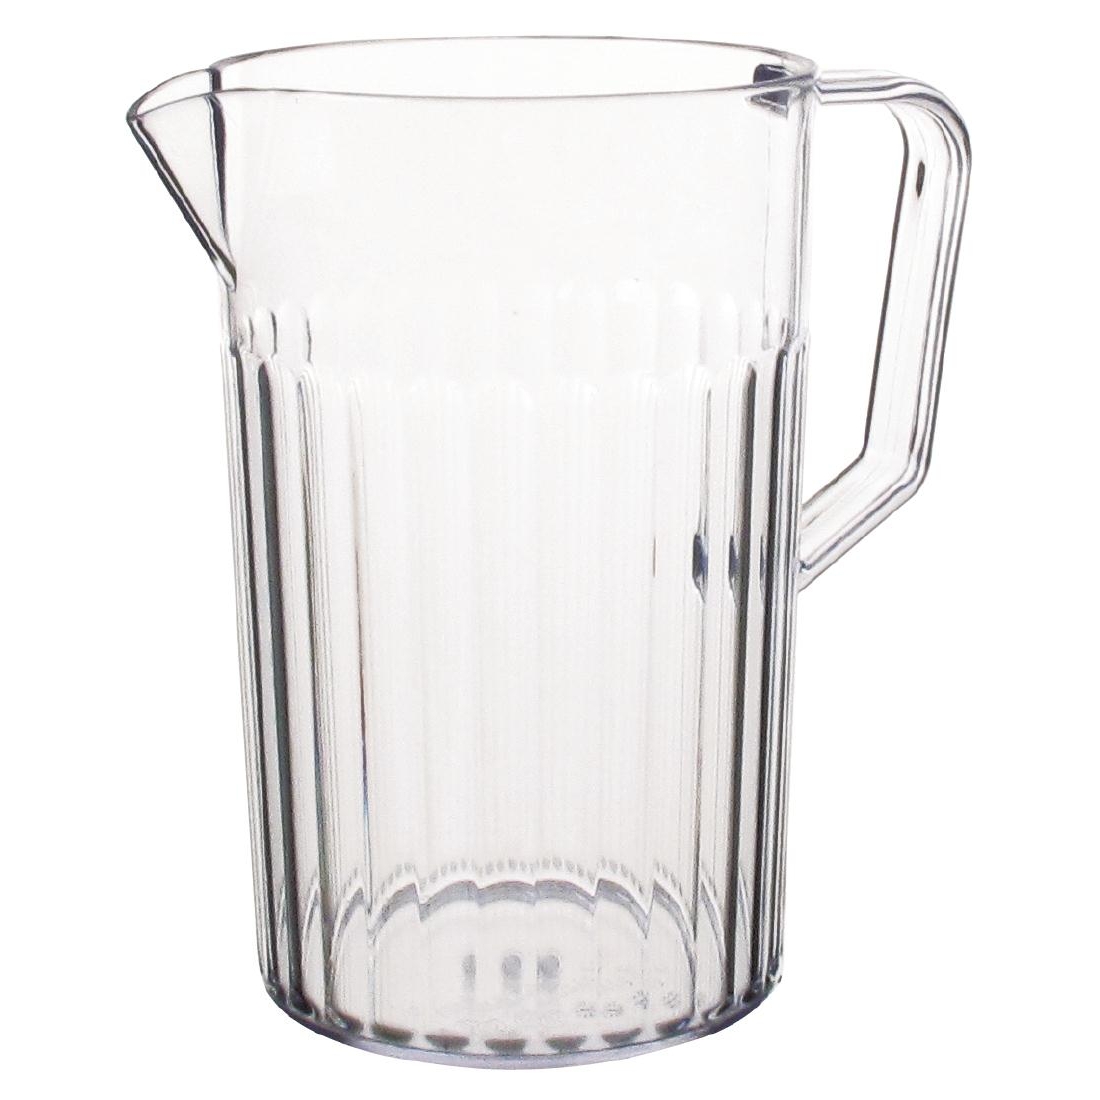 2 Pack - Large White (clear) Plastic Carafe Pitcher -Acrylic -BPA Free -57  oz.(1.7 LT.) - Durable - For Juice - Water - Wine - Iced Tea or Milk- Not